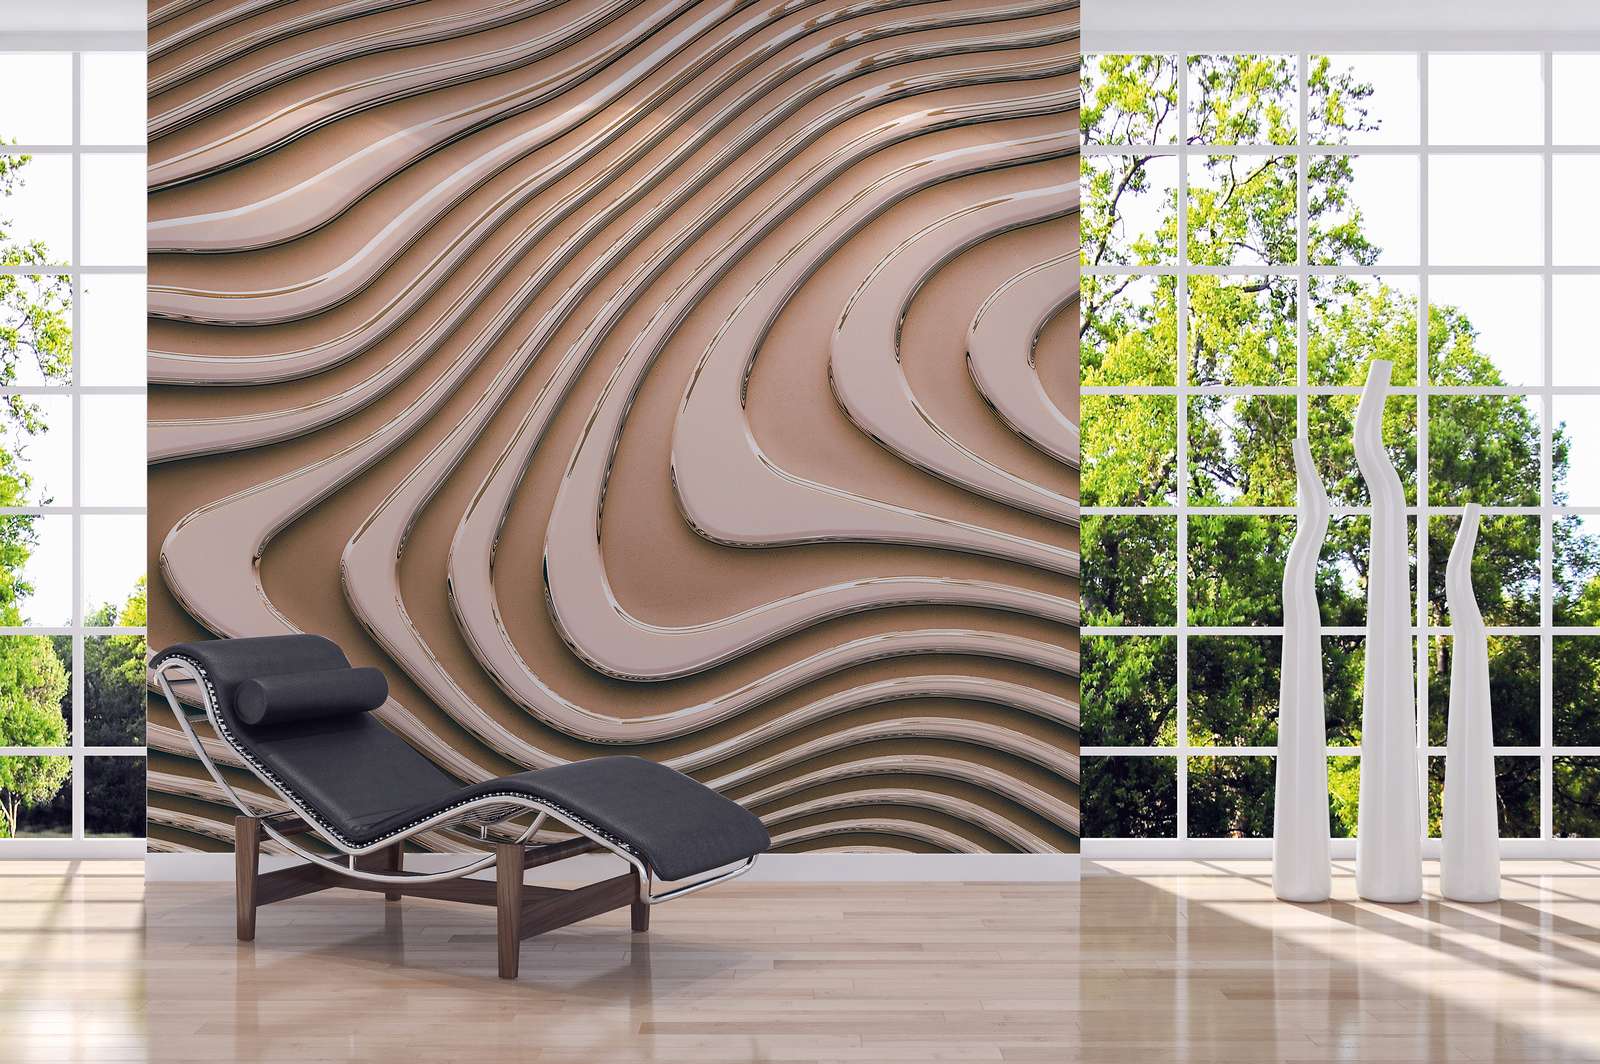             Wavy Lines and Shadows Wallpaper - Beige, Brown
        